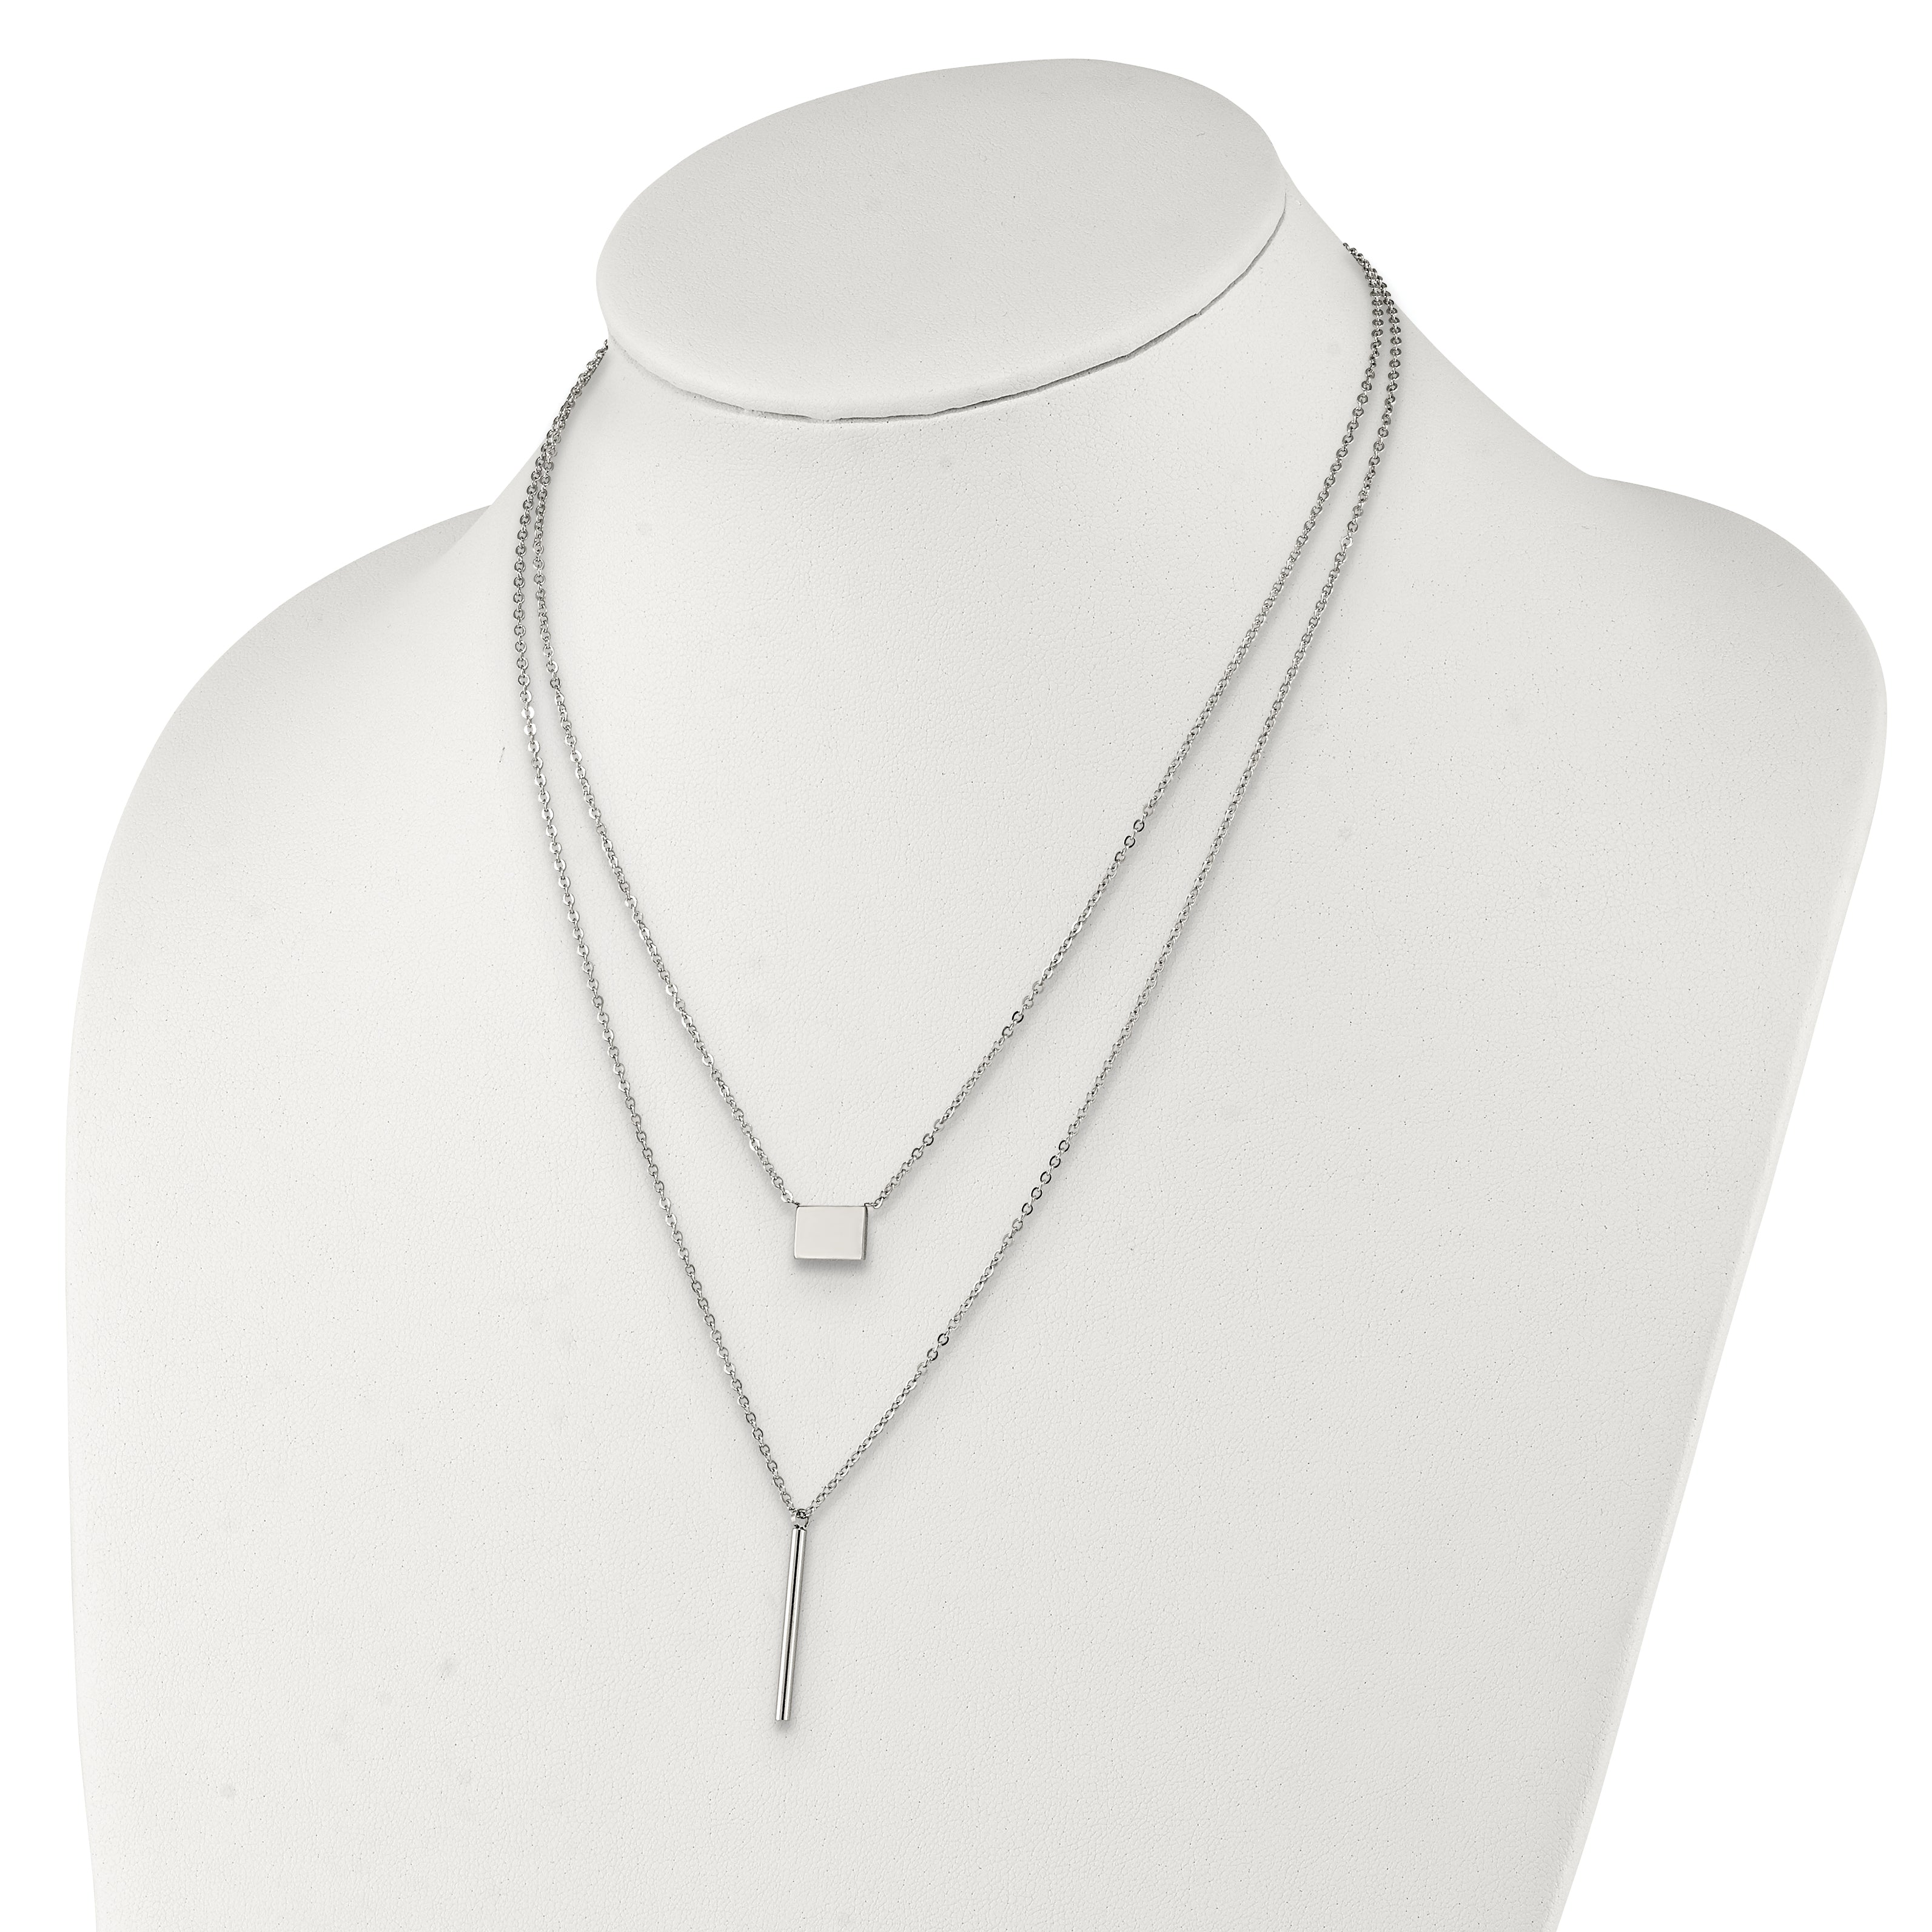 Chisel Stainless Steel Polished Two Strand Square and Bar 16.5 inch with a 2 inch Extension Necklace